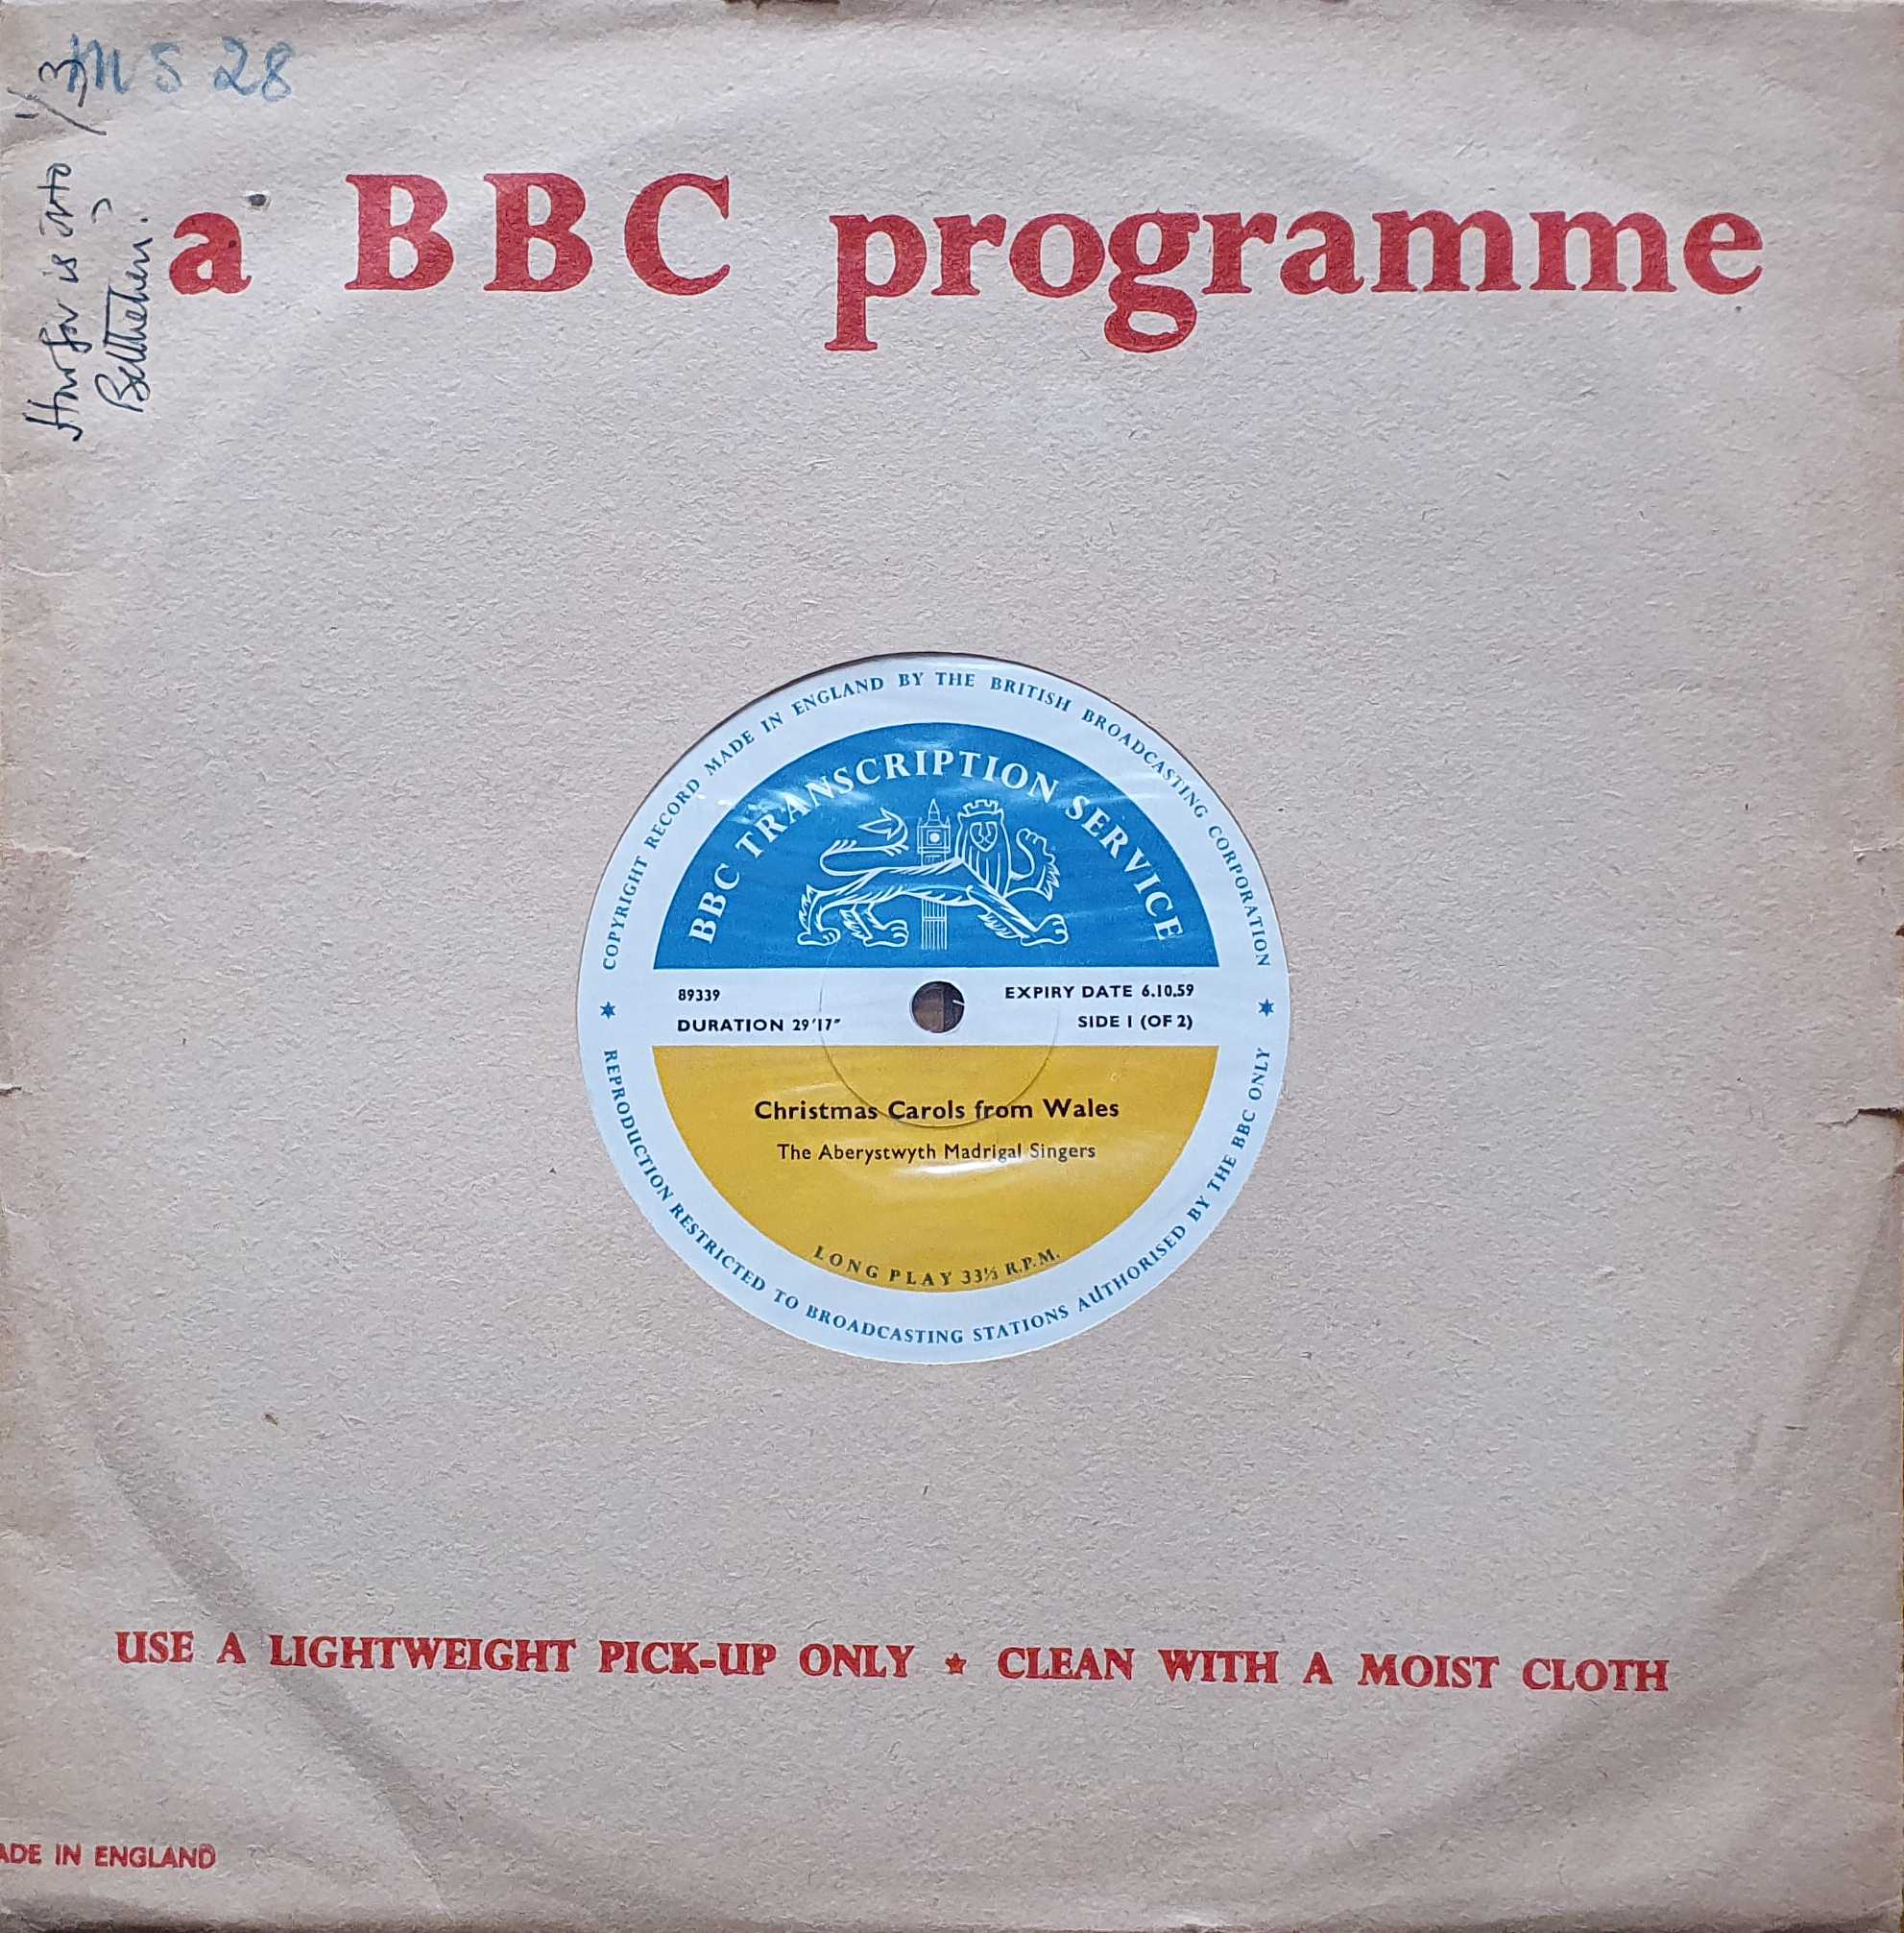 Picture of 89339 Christmas carols from Wales (Side 1 of 2) / How far is it to Bethlehem? (Side 1 of 2) 10 inch by artist Various from the BBC records and Tapes library